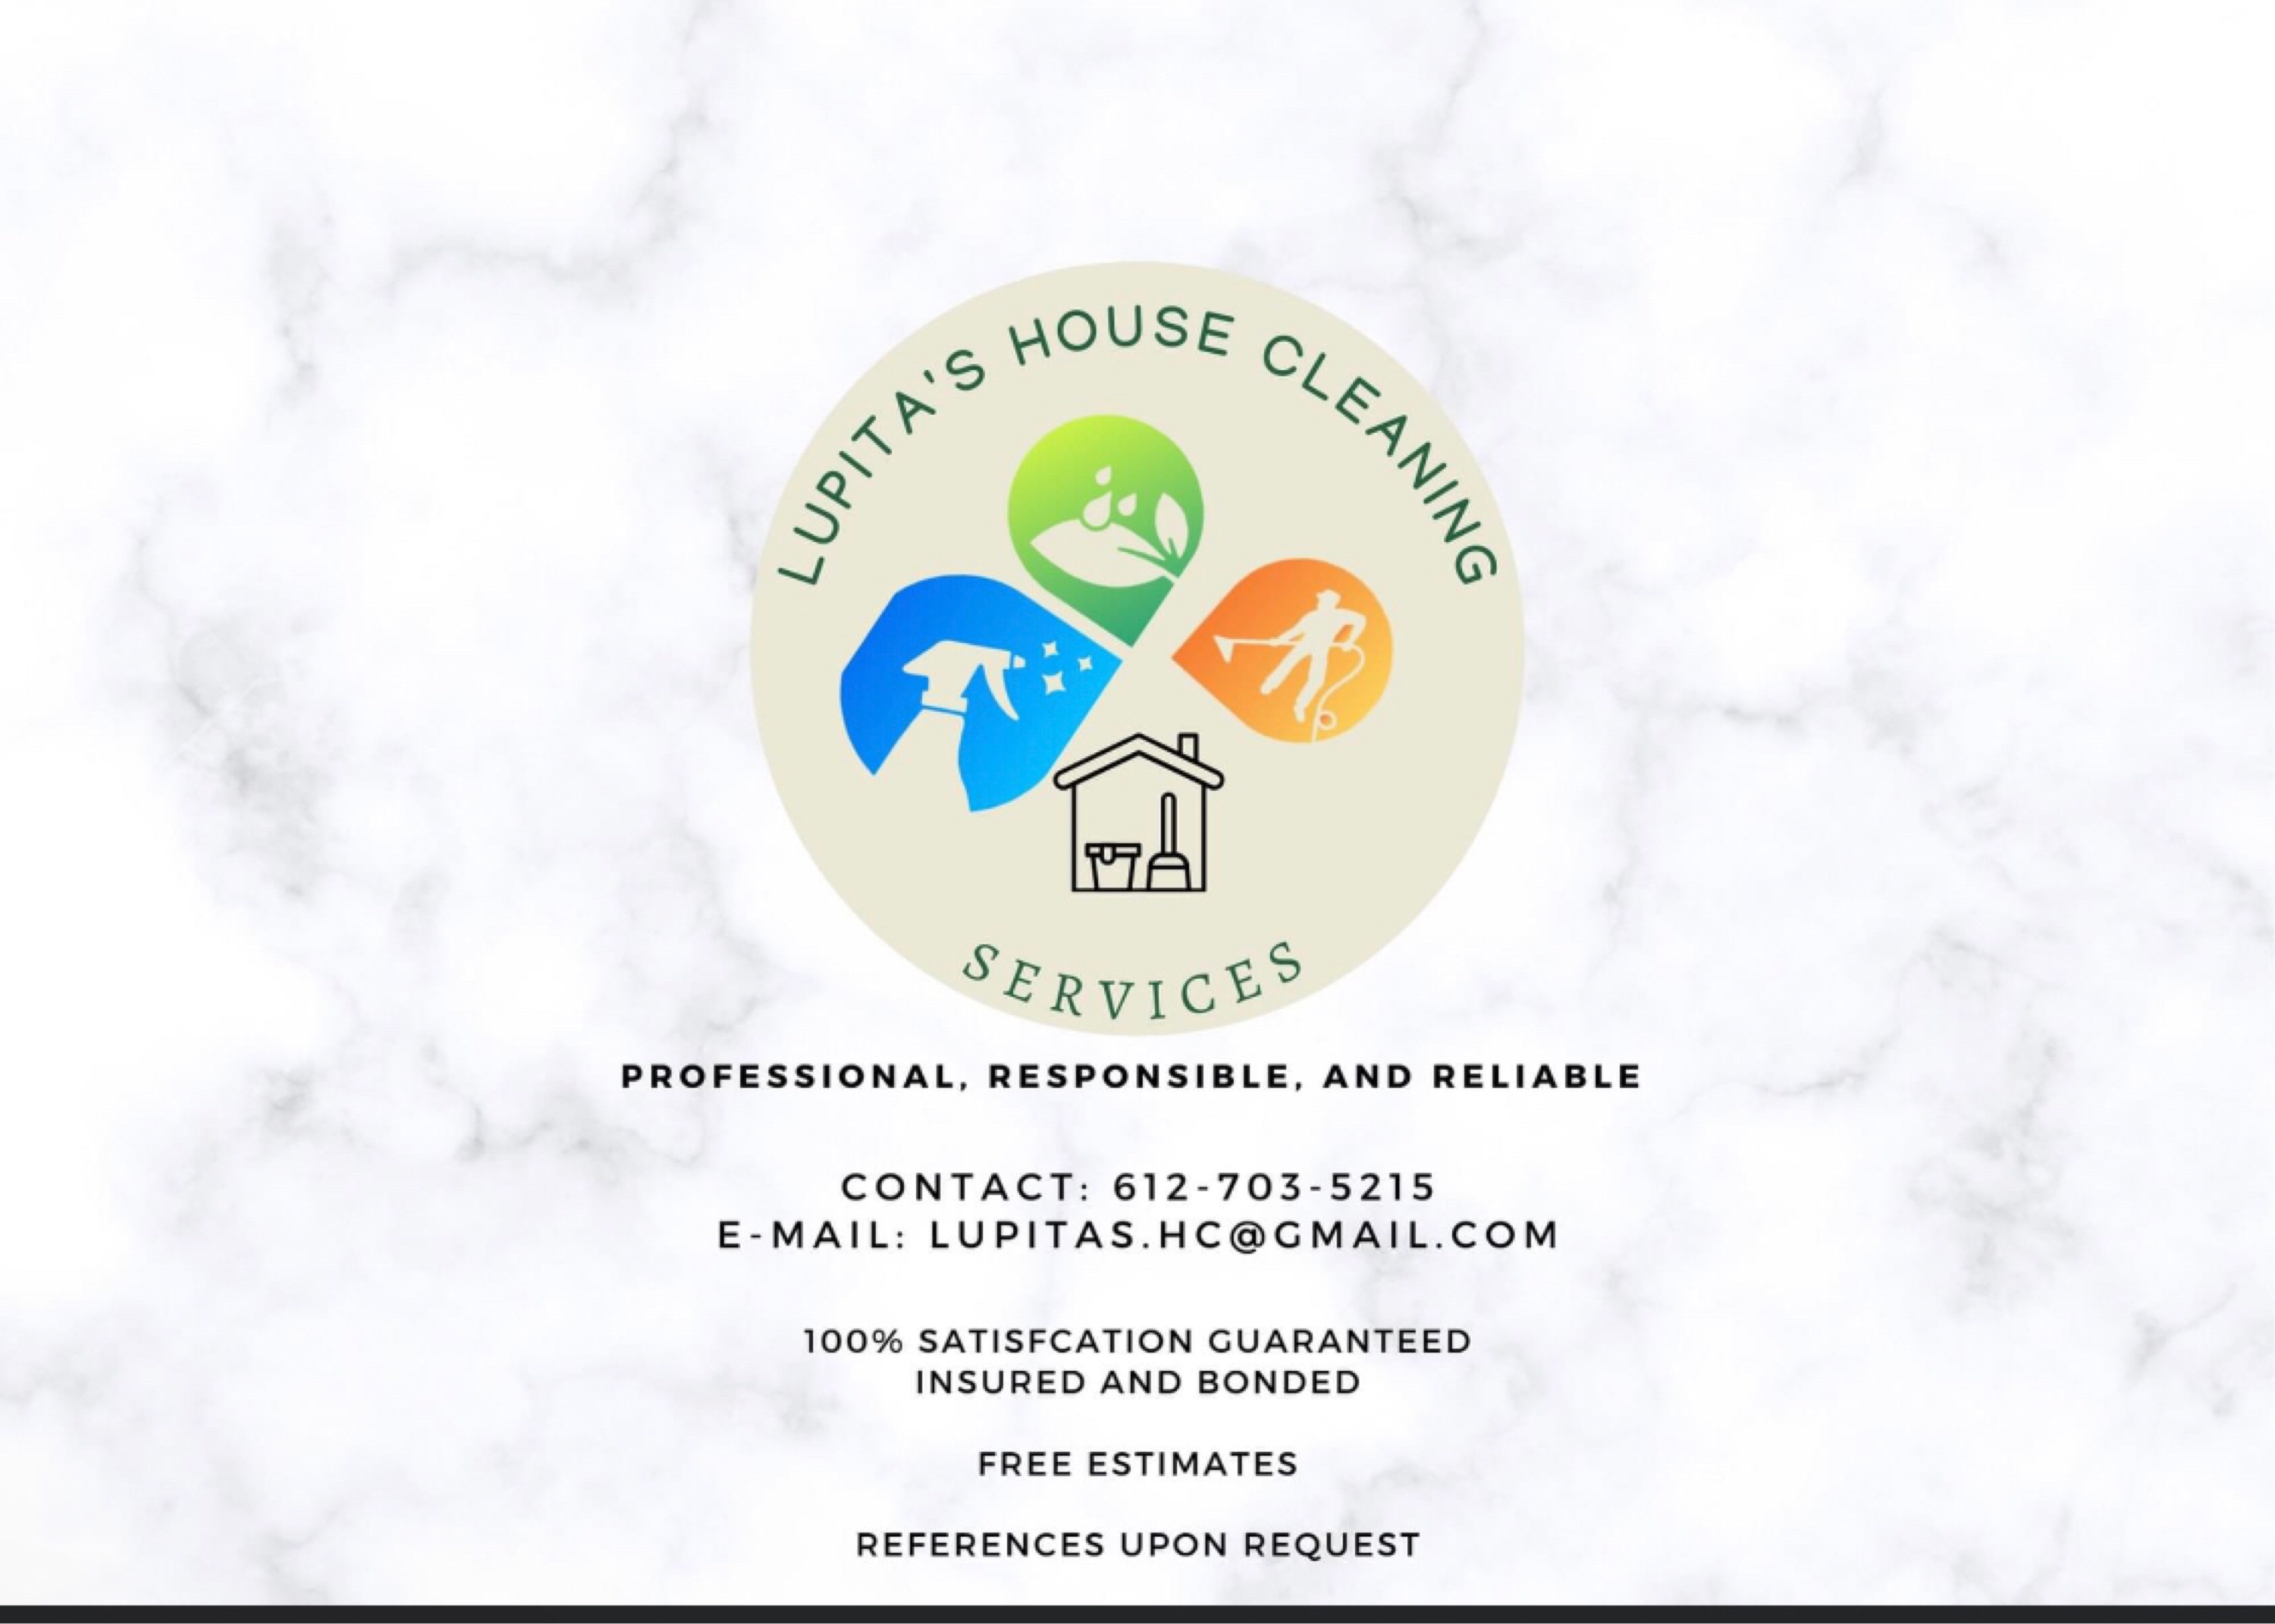 Lupita's House Cleaning Services Logo